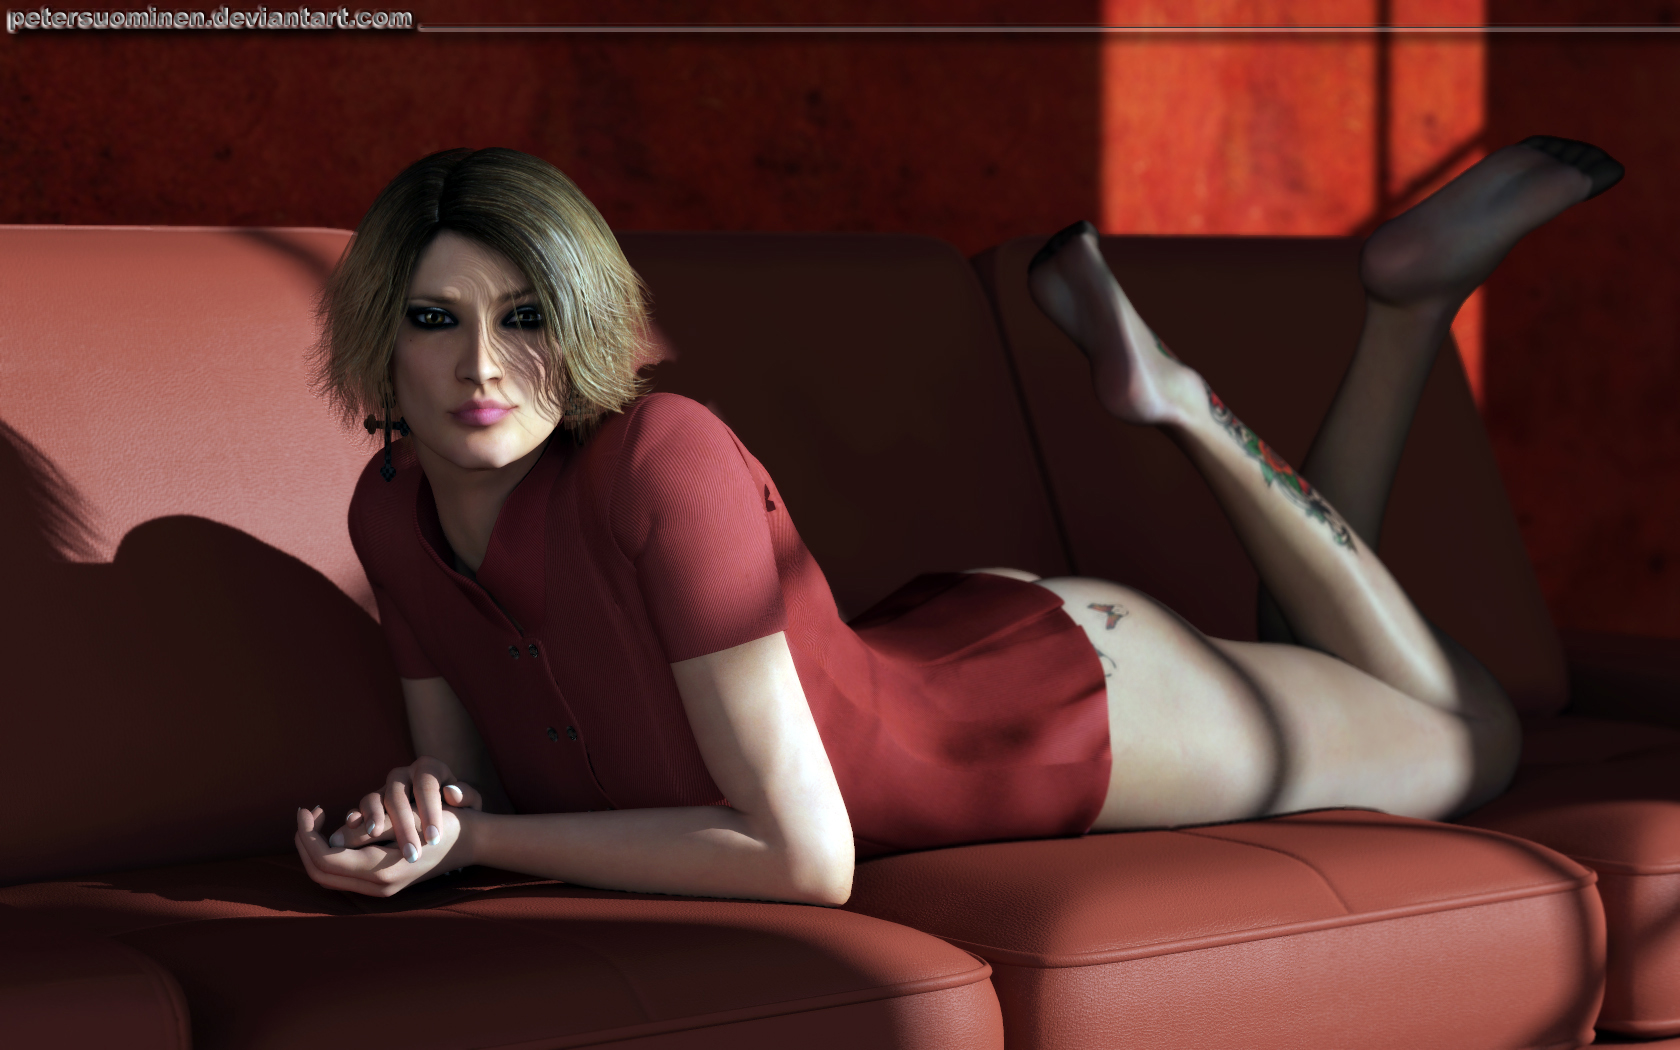 http://fc02.deviantart.net/fs71/f/2012/021/2/6/cheeky_couch_by_petersuominen-d4n4fly.jpg